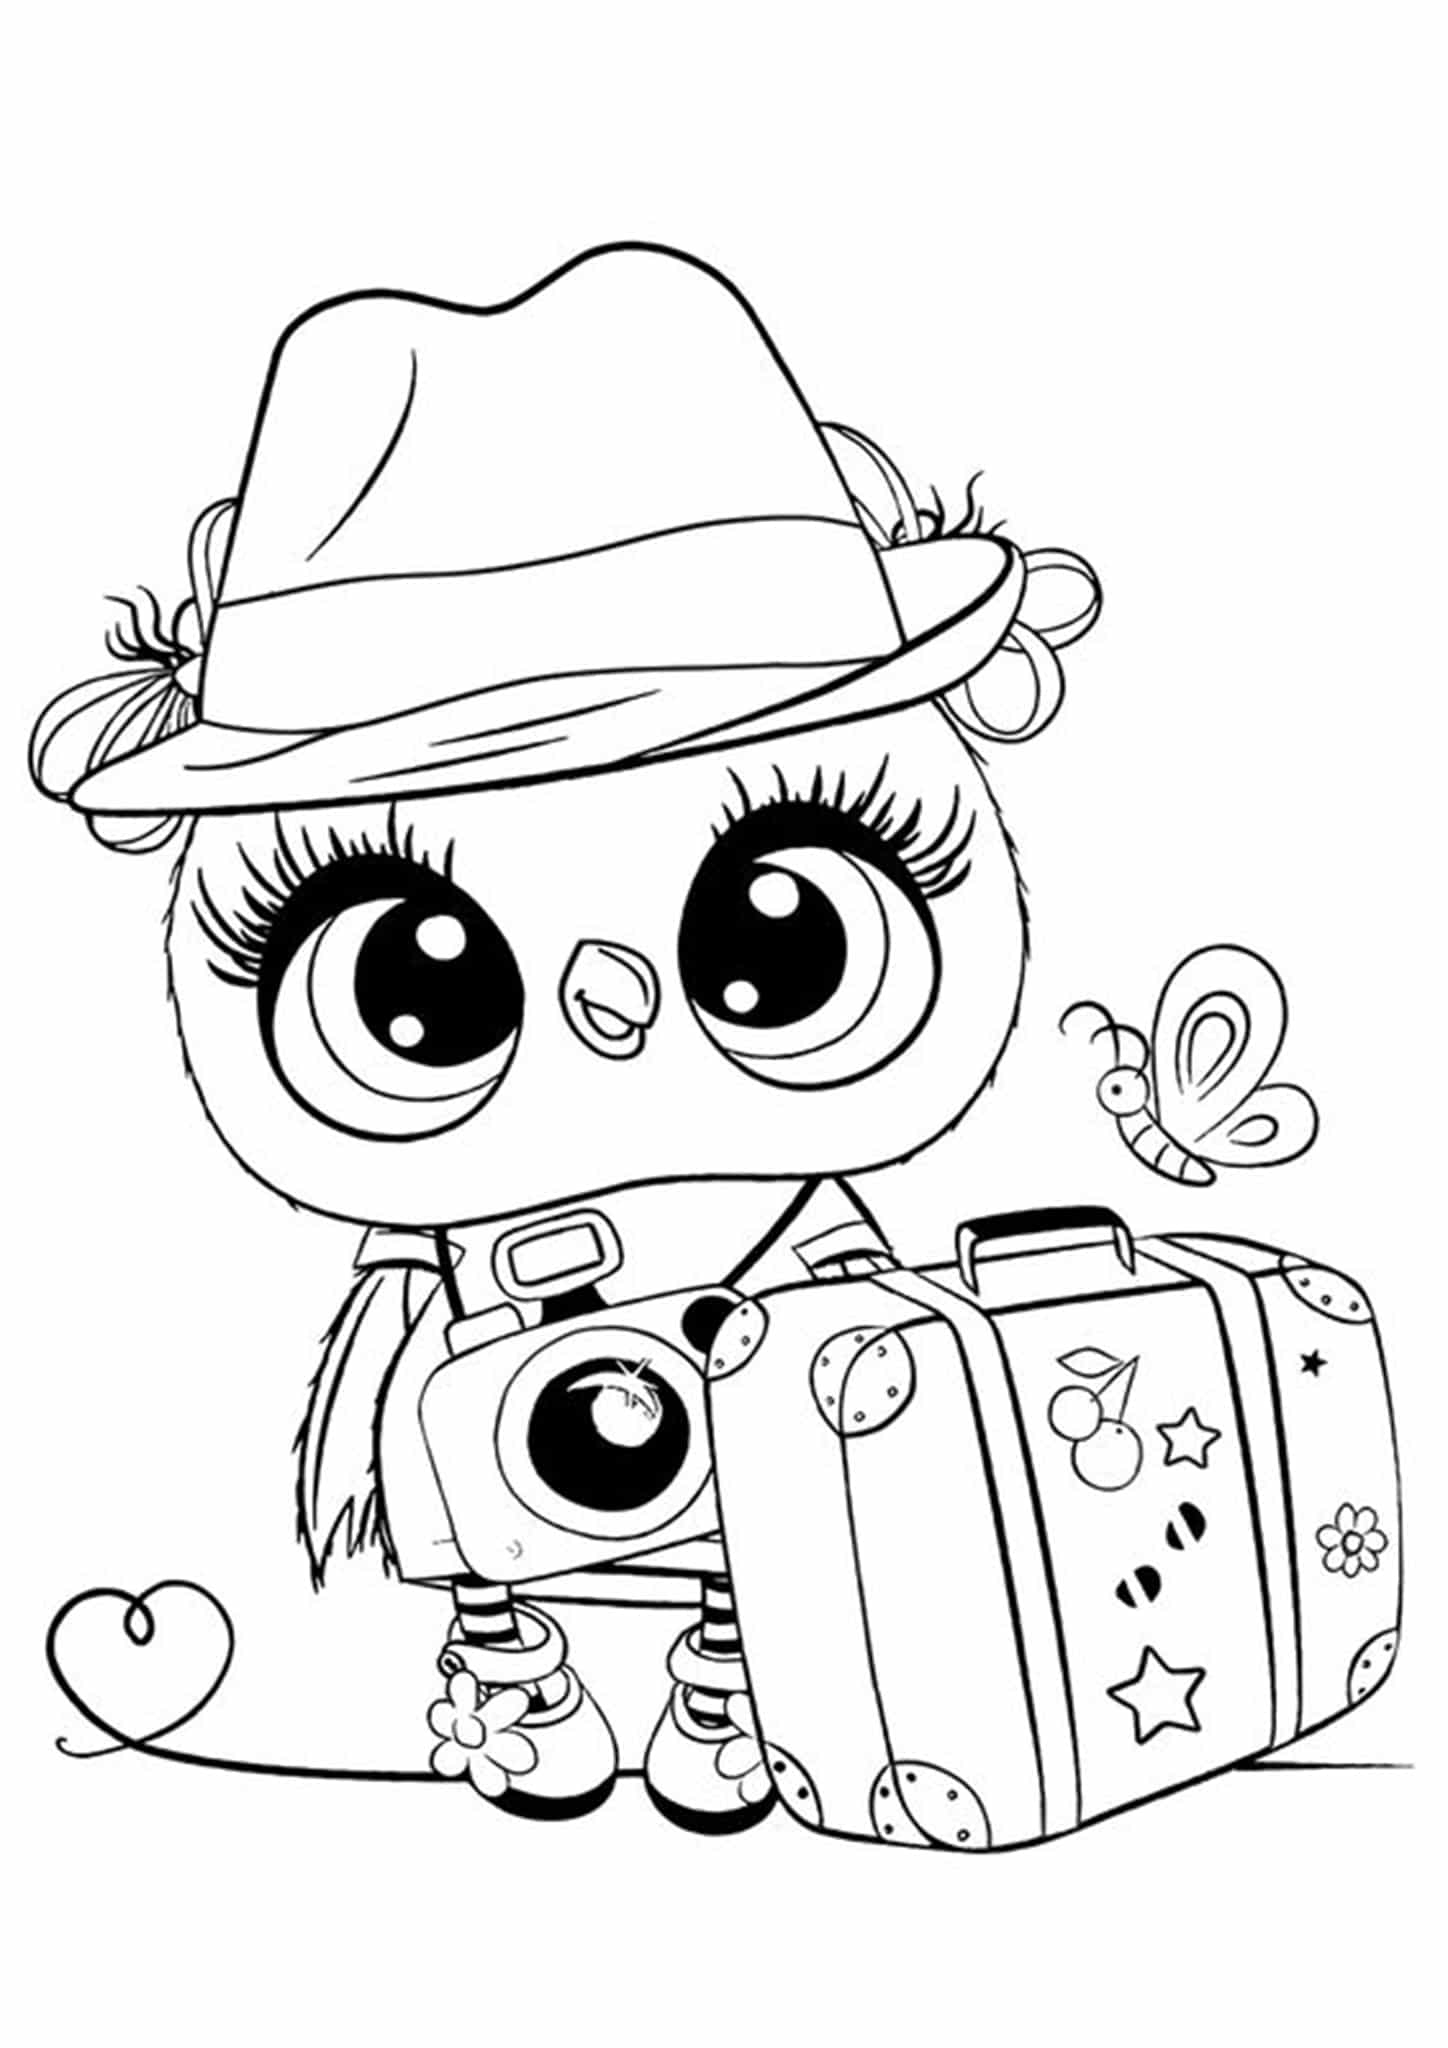 Coloring Pages Easy To Print Coloring Pages For Girls - Coloring Pages